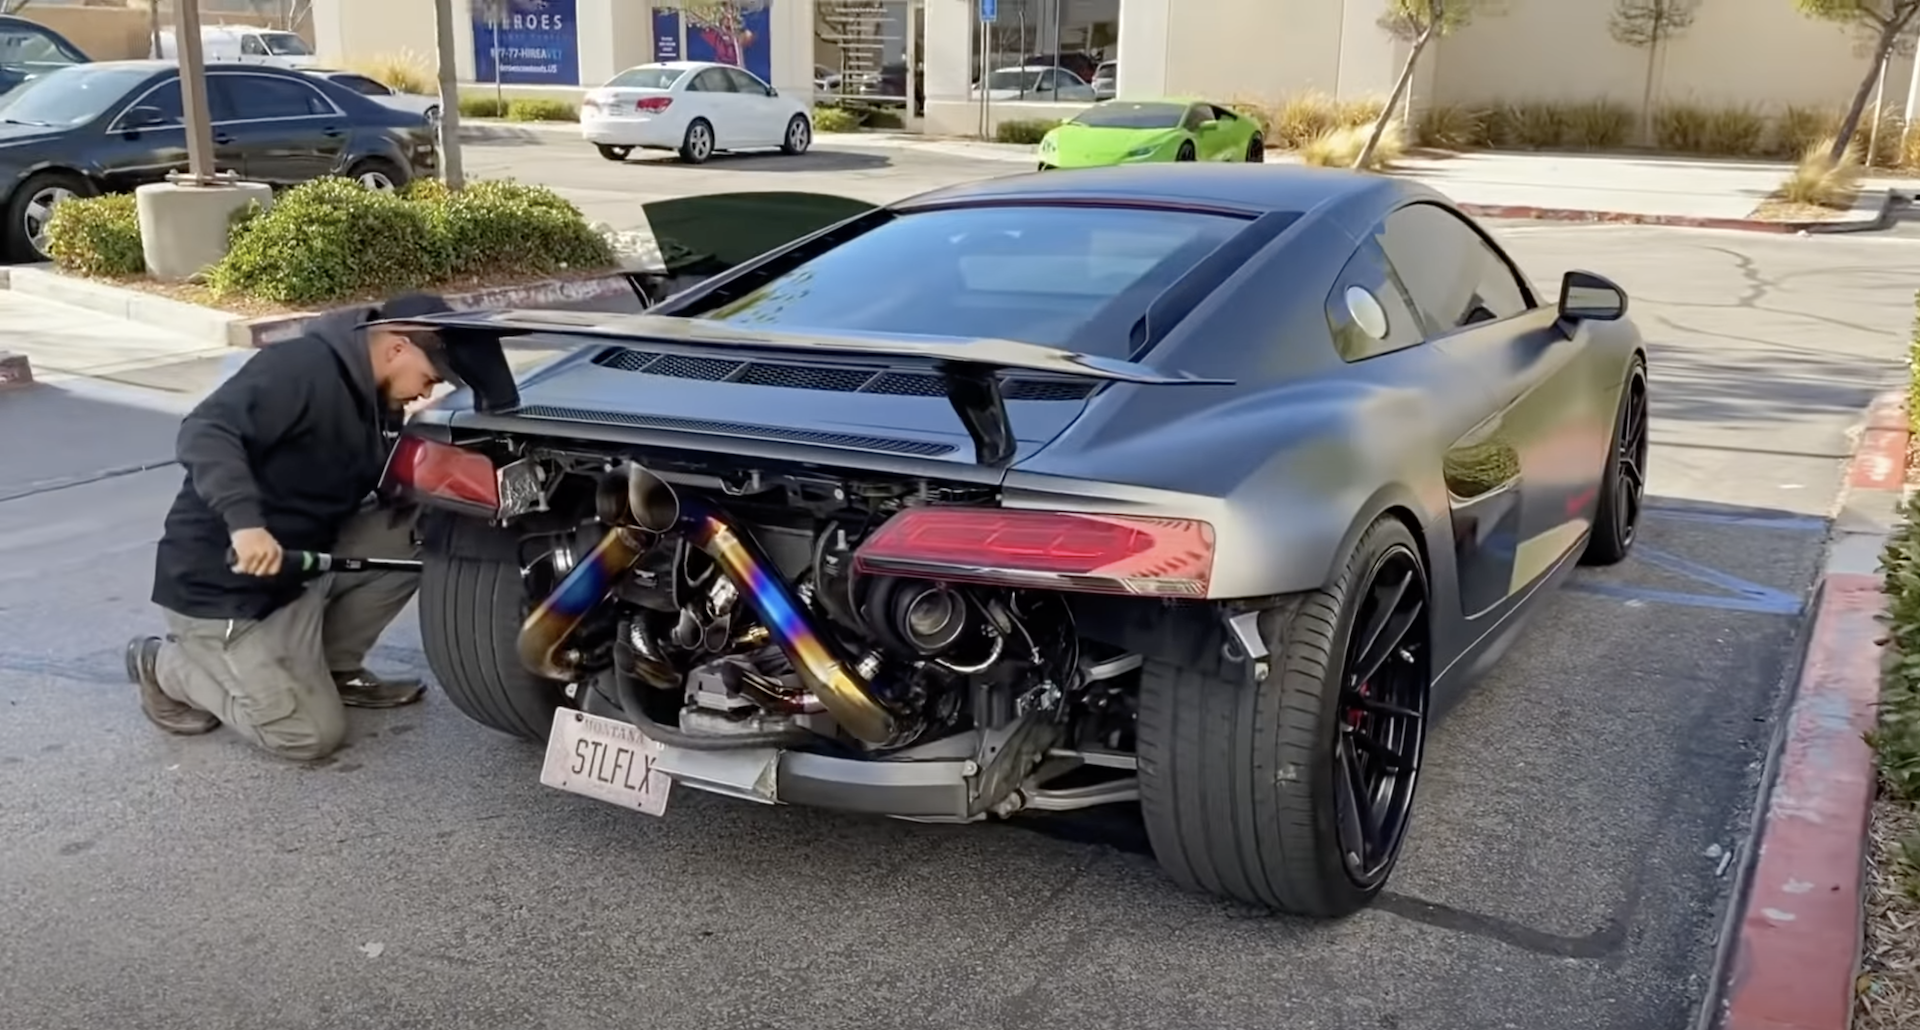 An image of an Audi R8 with a twin-turbo kit.